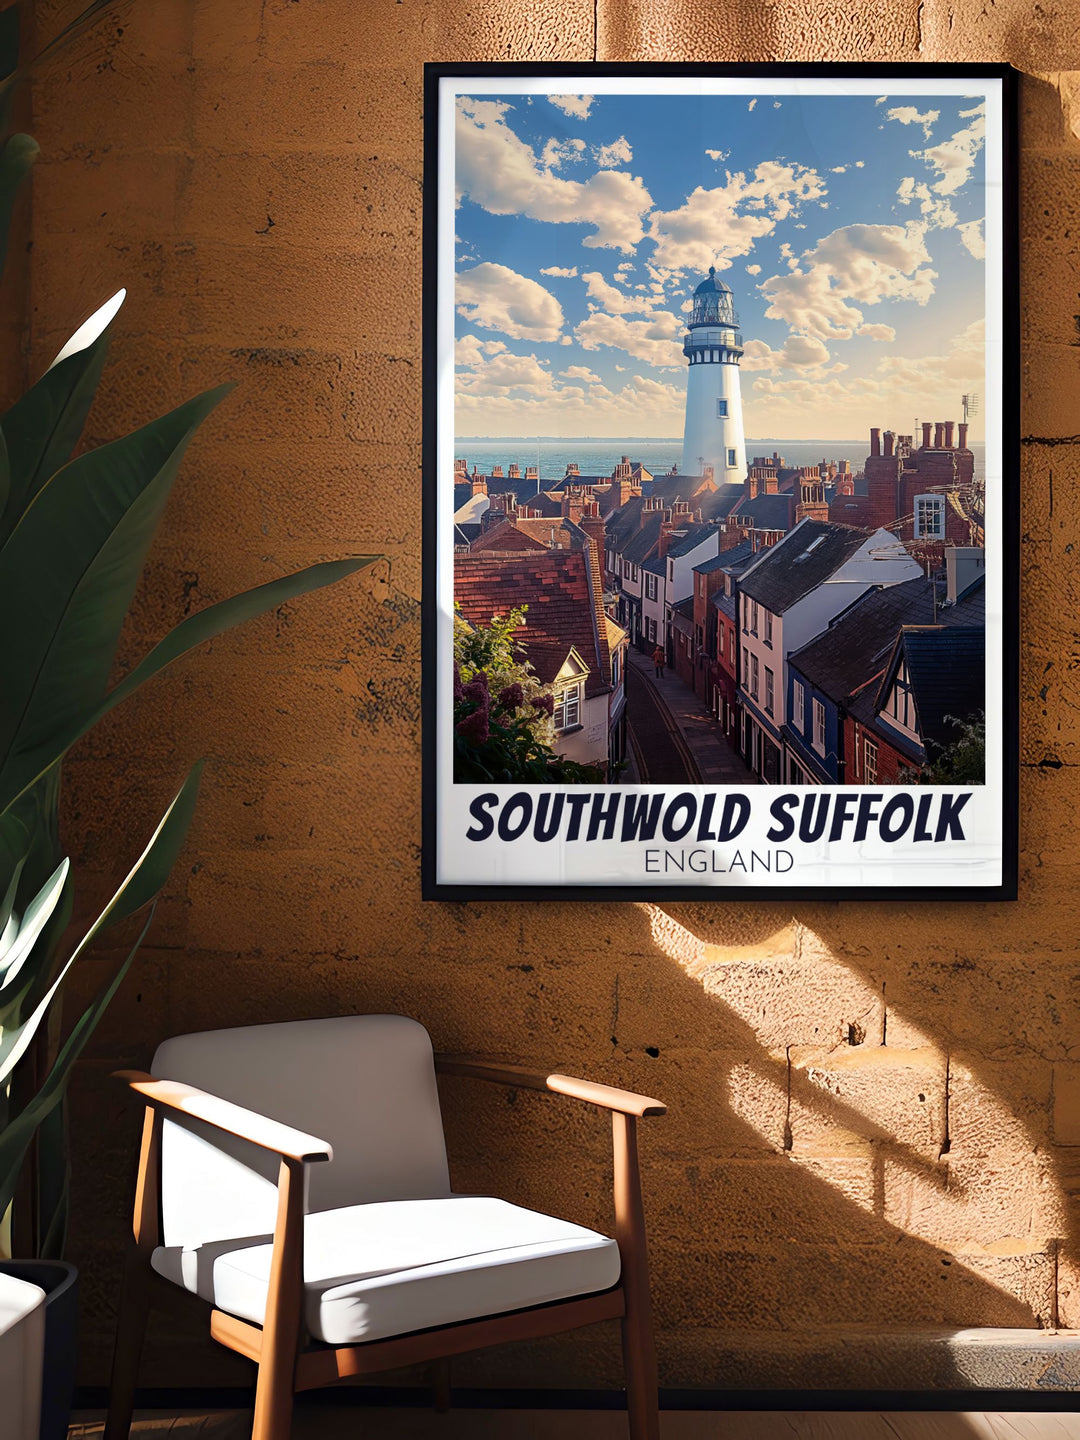 Southwold Beach Huts and Seaside Poster capturing the vibrant colors and tranquil beauty of Southwolds coastline with the iconic SouthwoldLighthouse a must have vintage travel print for art collectors and lovers of coastal scenery